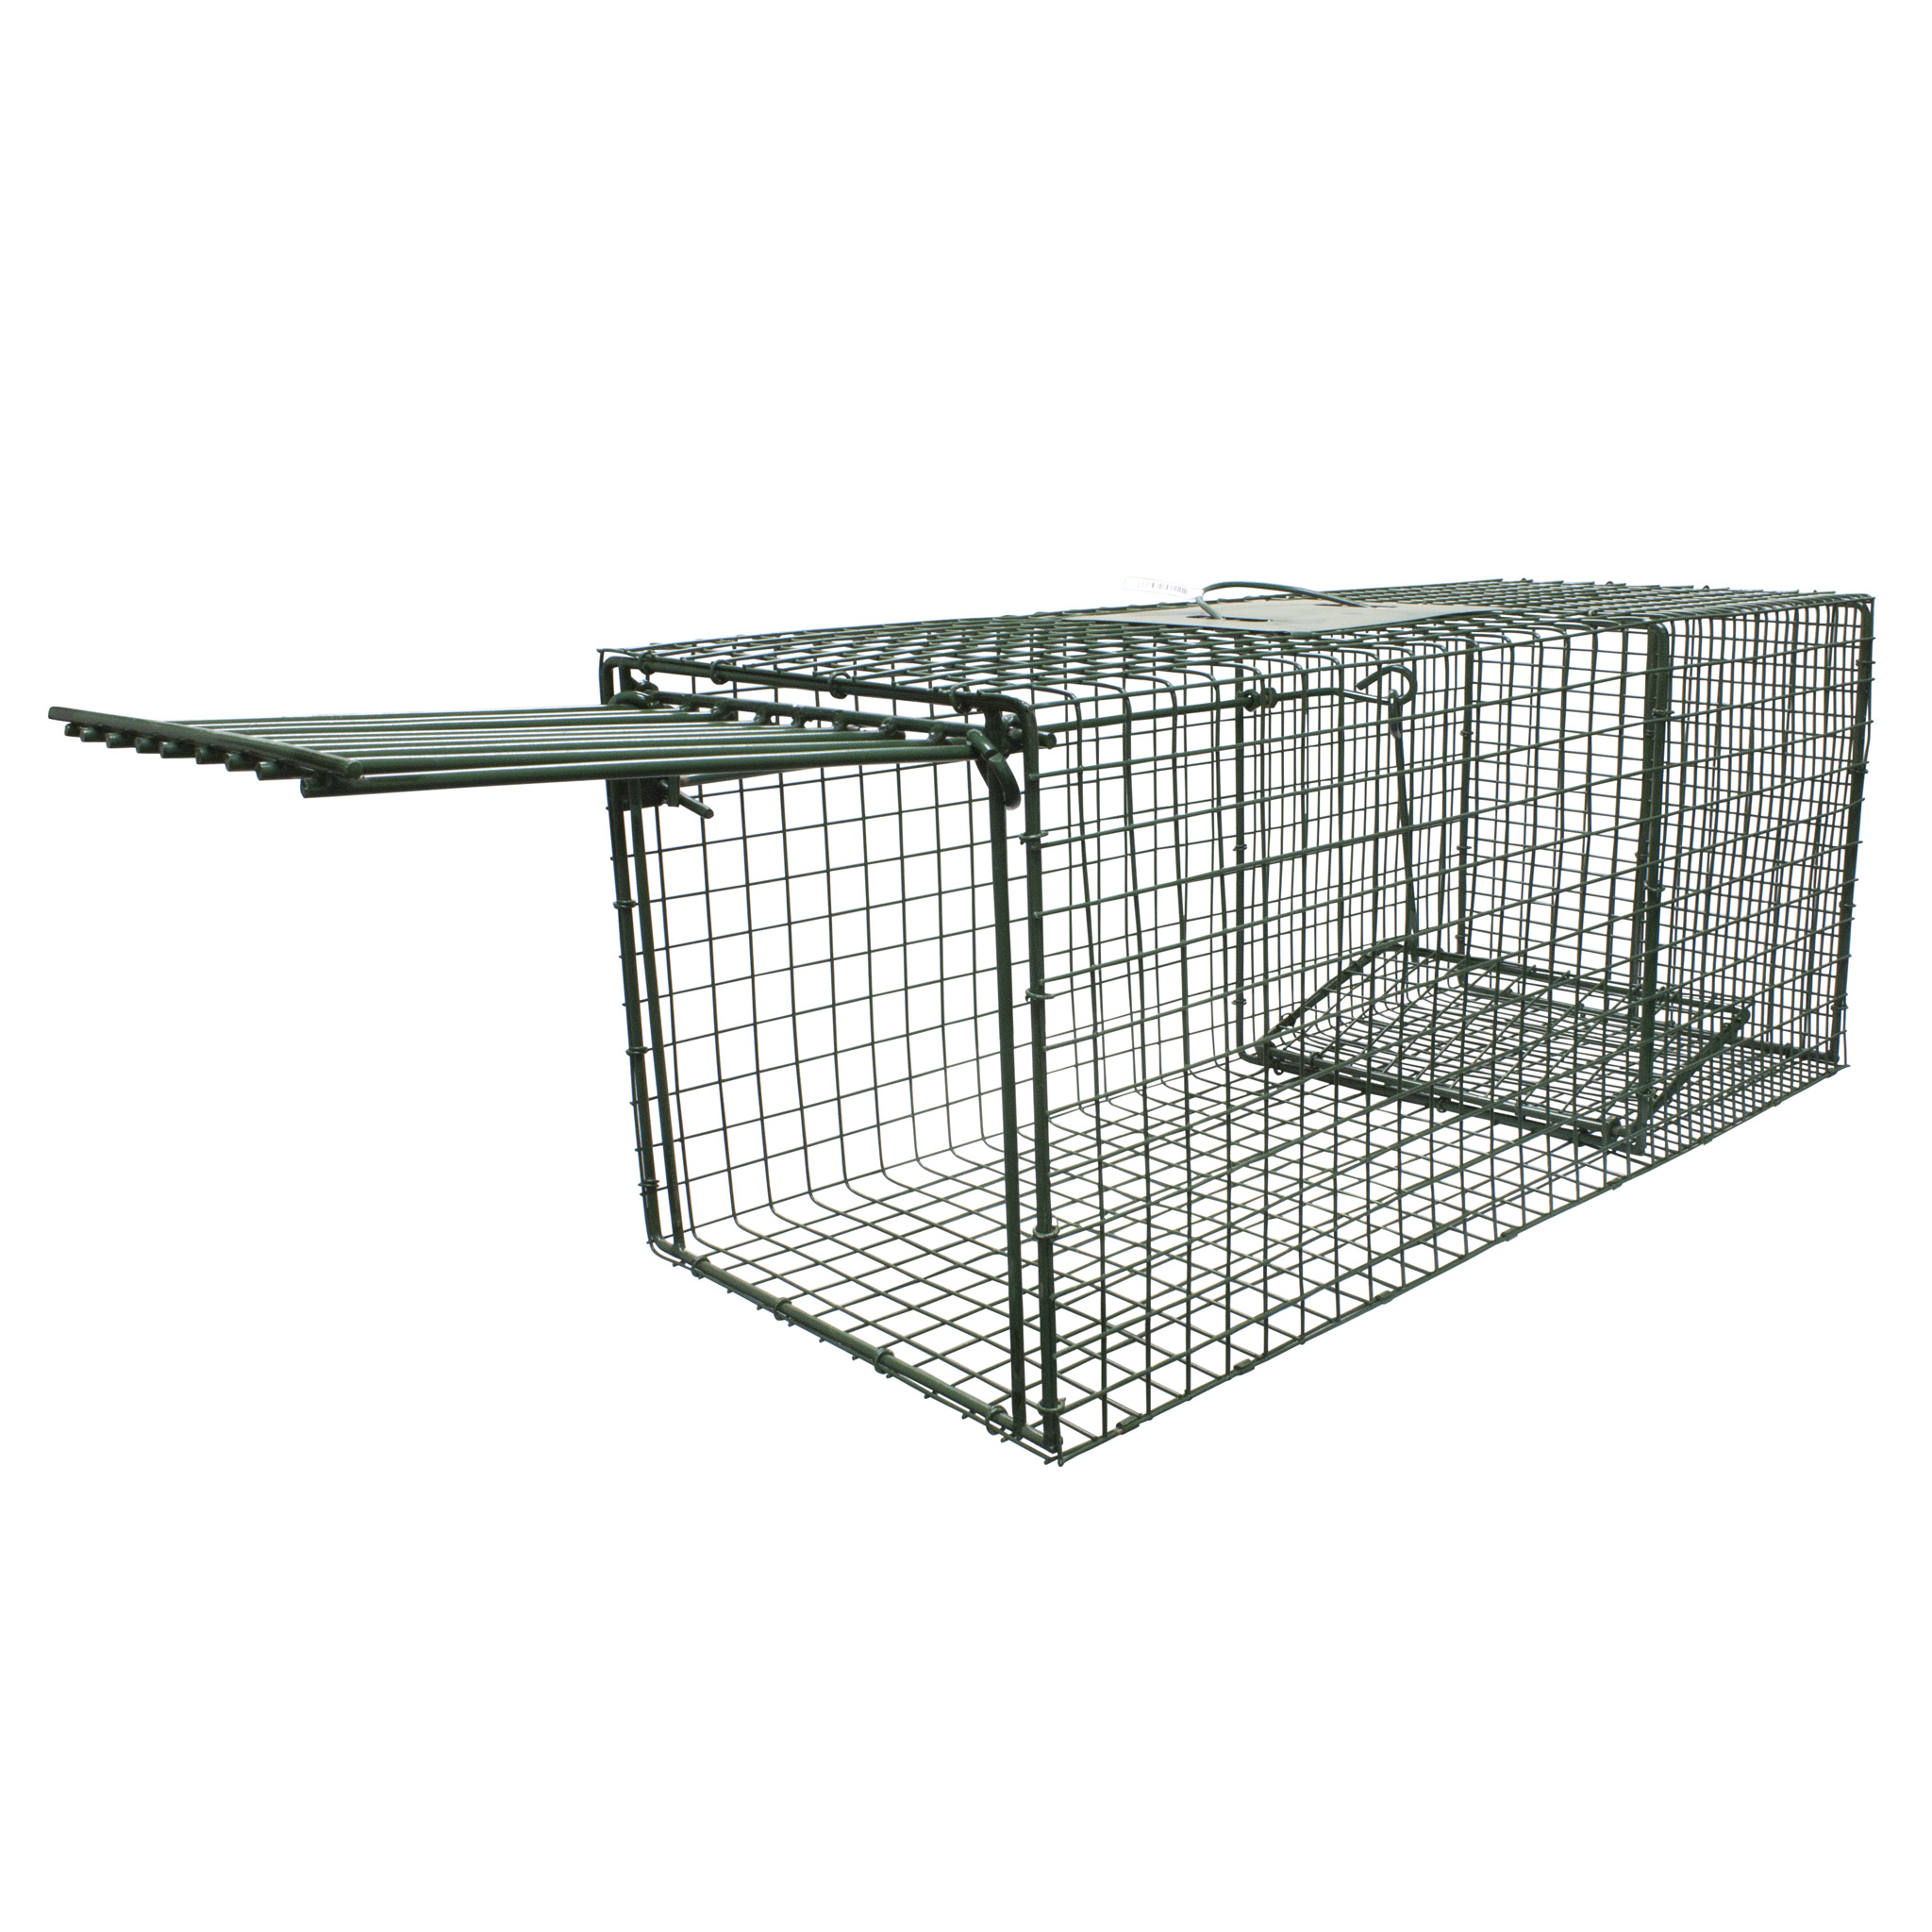 Extra Large Animal Trap 72D